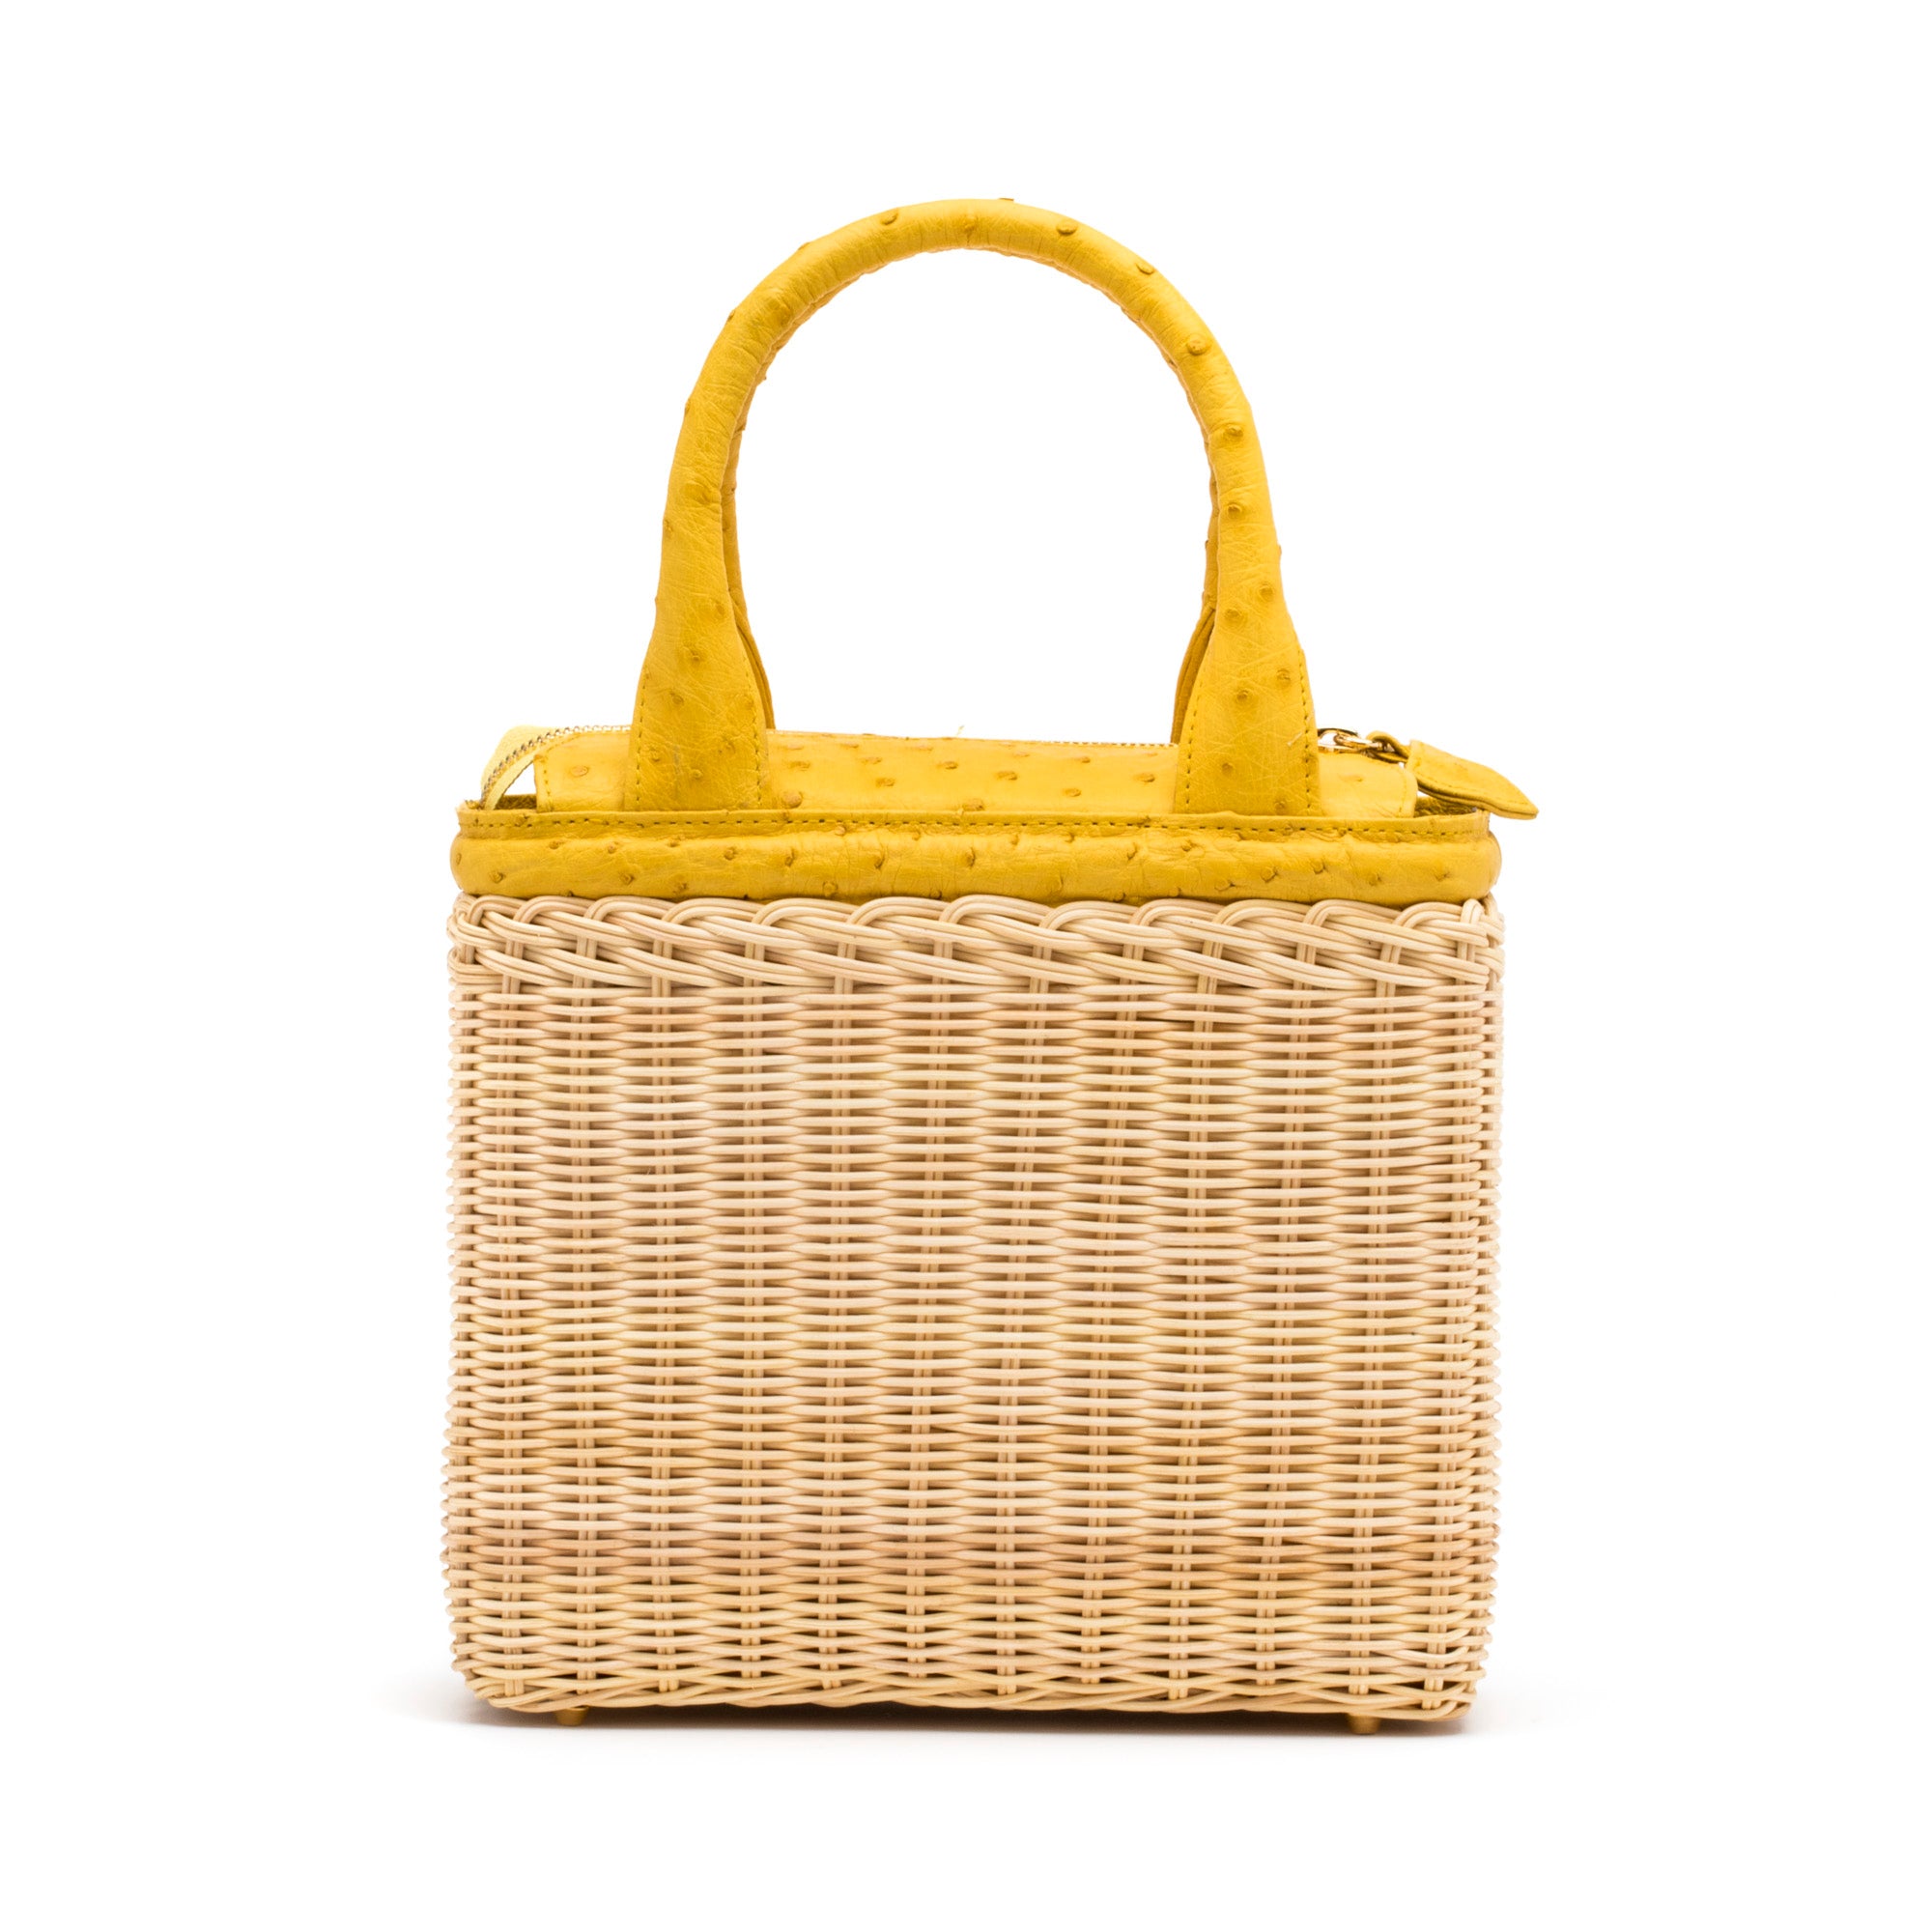 Palm Beach Tote in Yellow